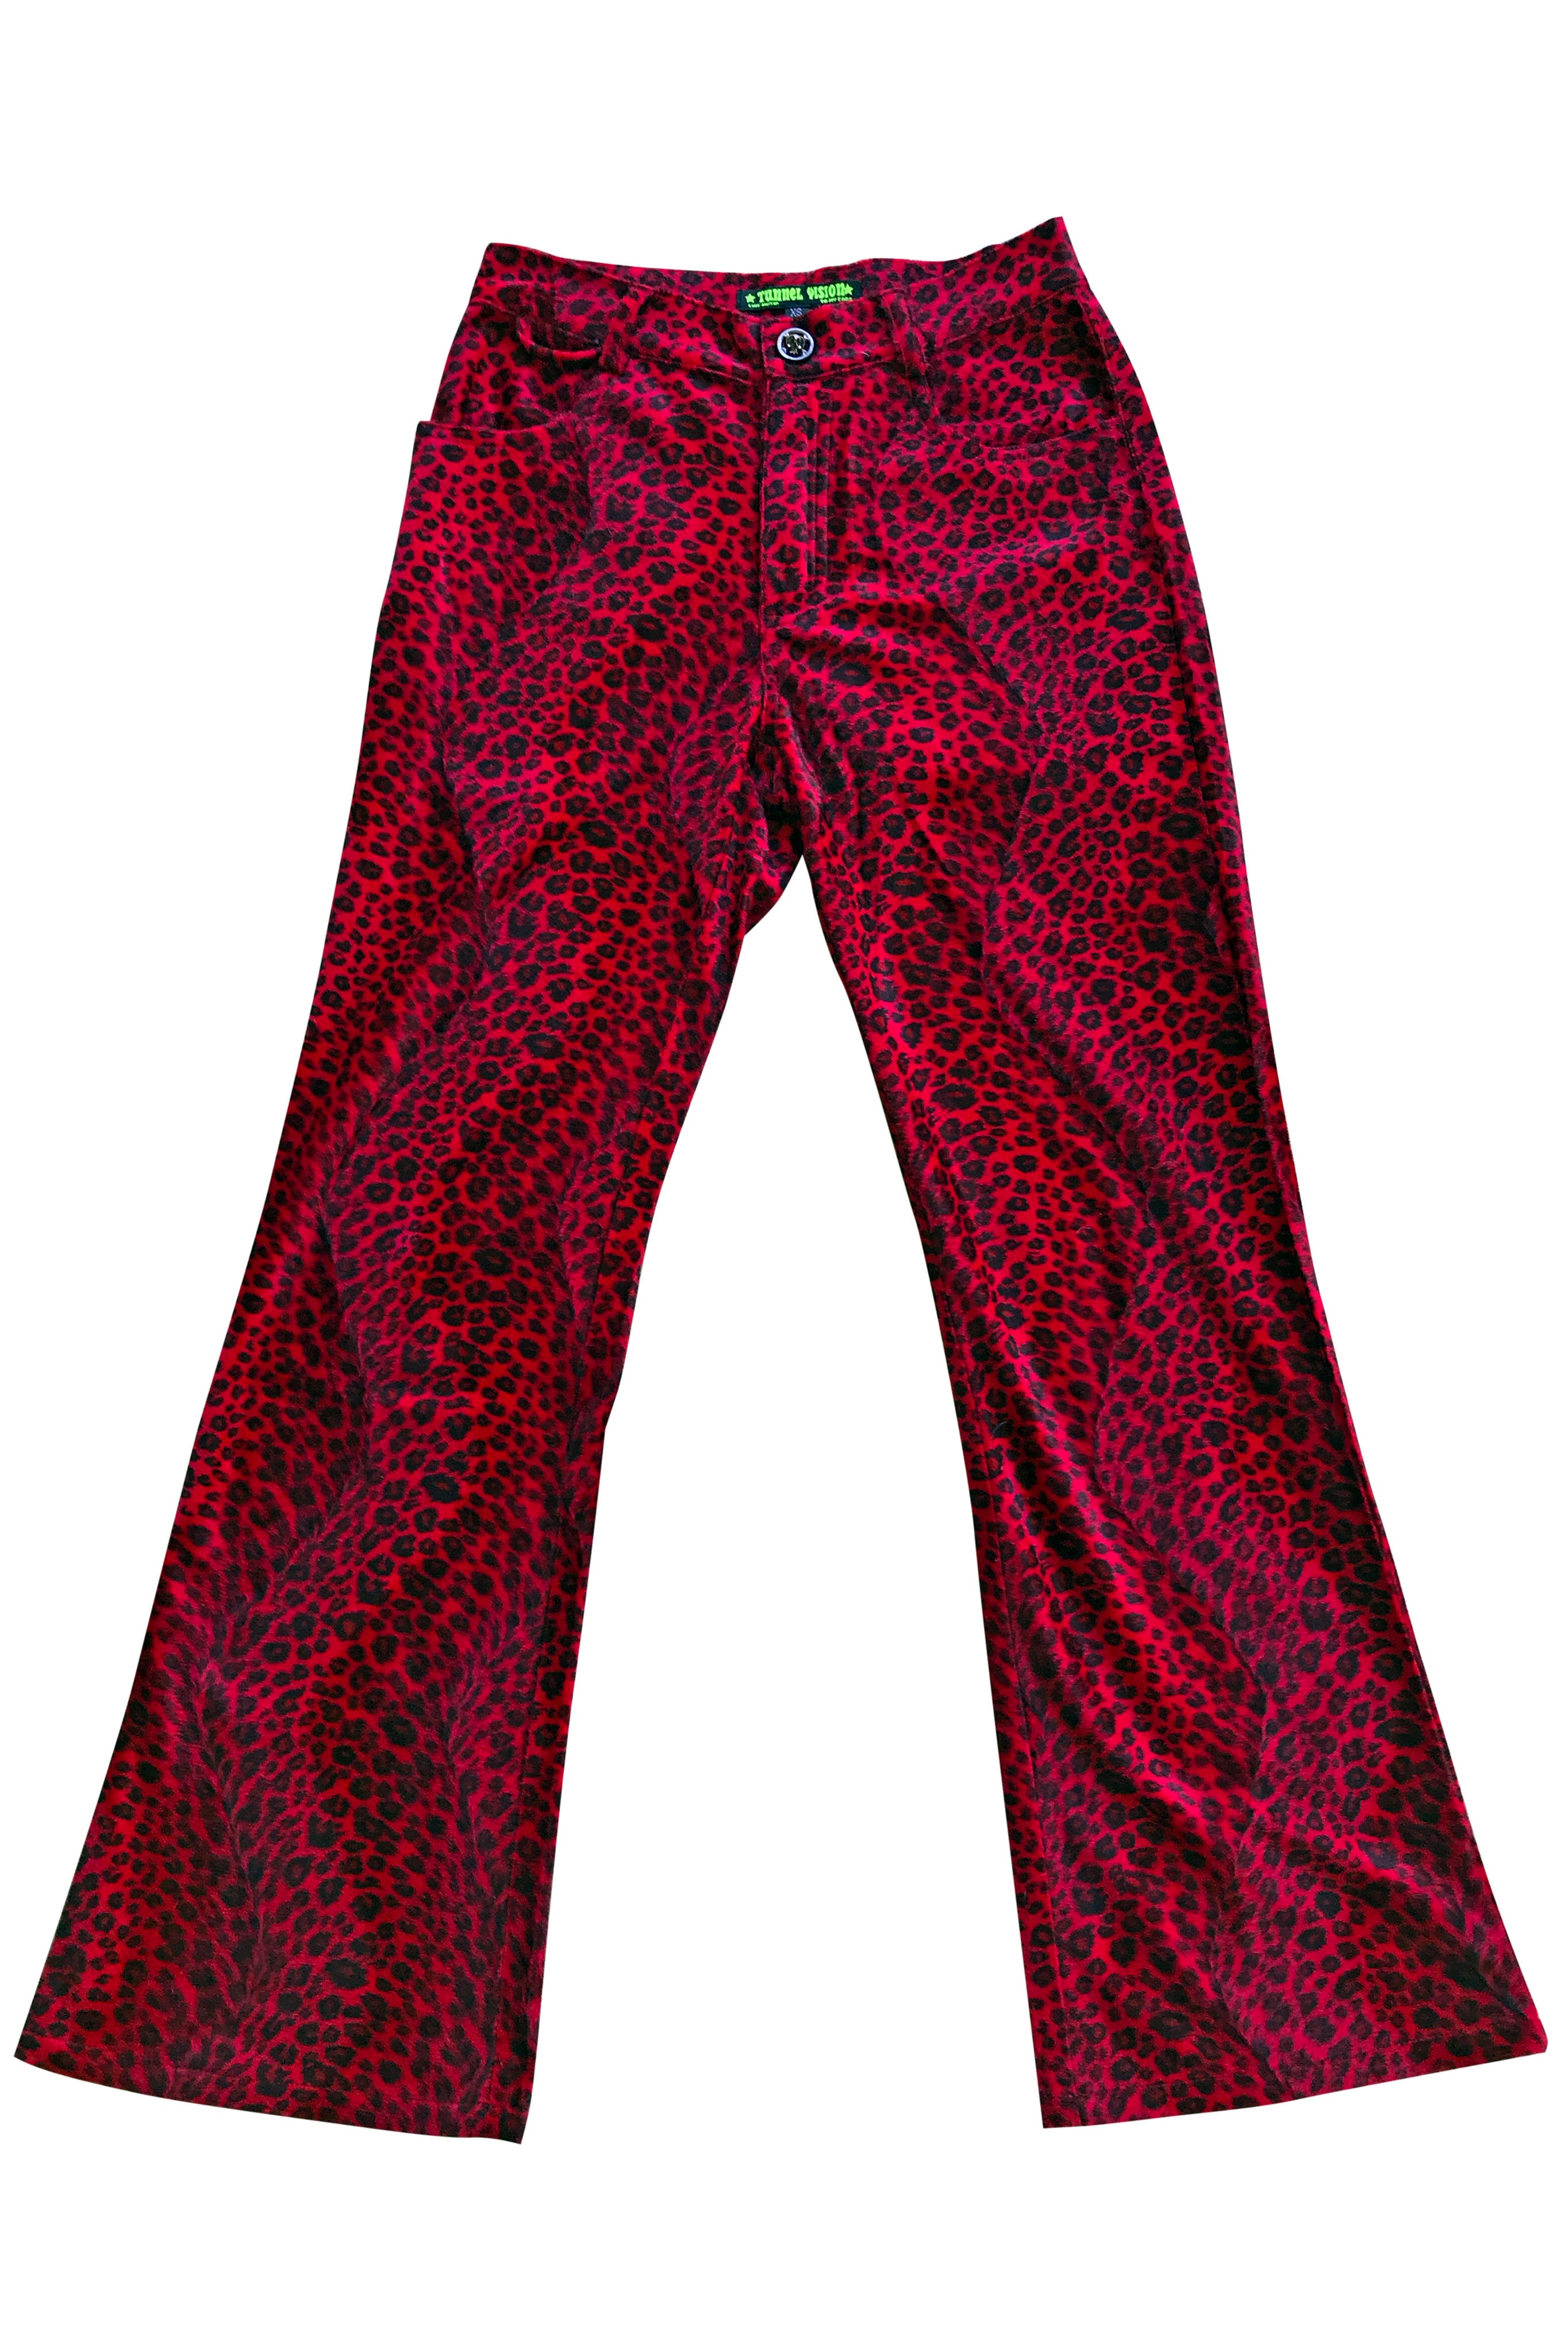 Red trousers and Leopard heels ⋆ chic everywhere